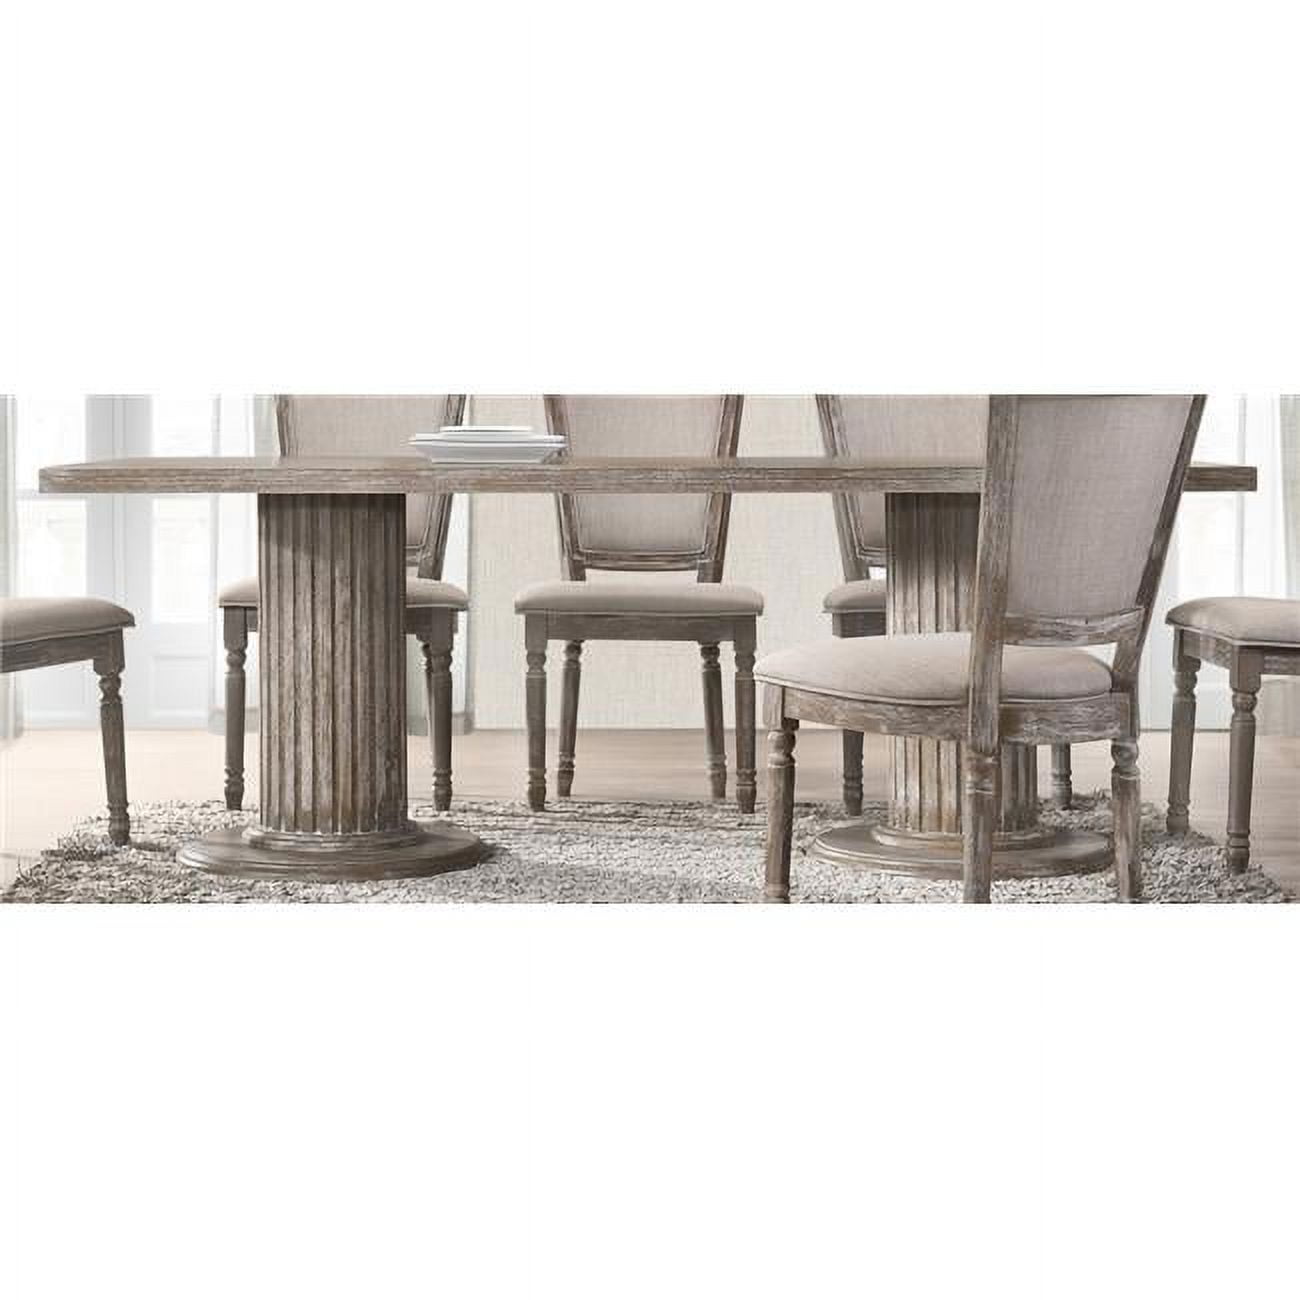 Picture of Best Master Furniture Jessica Rectangular Table Jessica Vintage Grey Rectangular Dinette Table